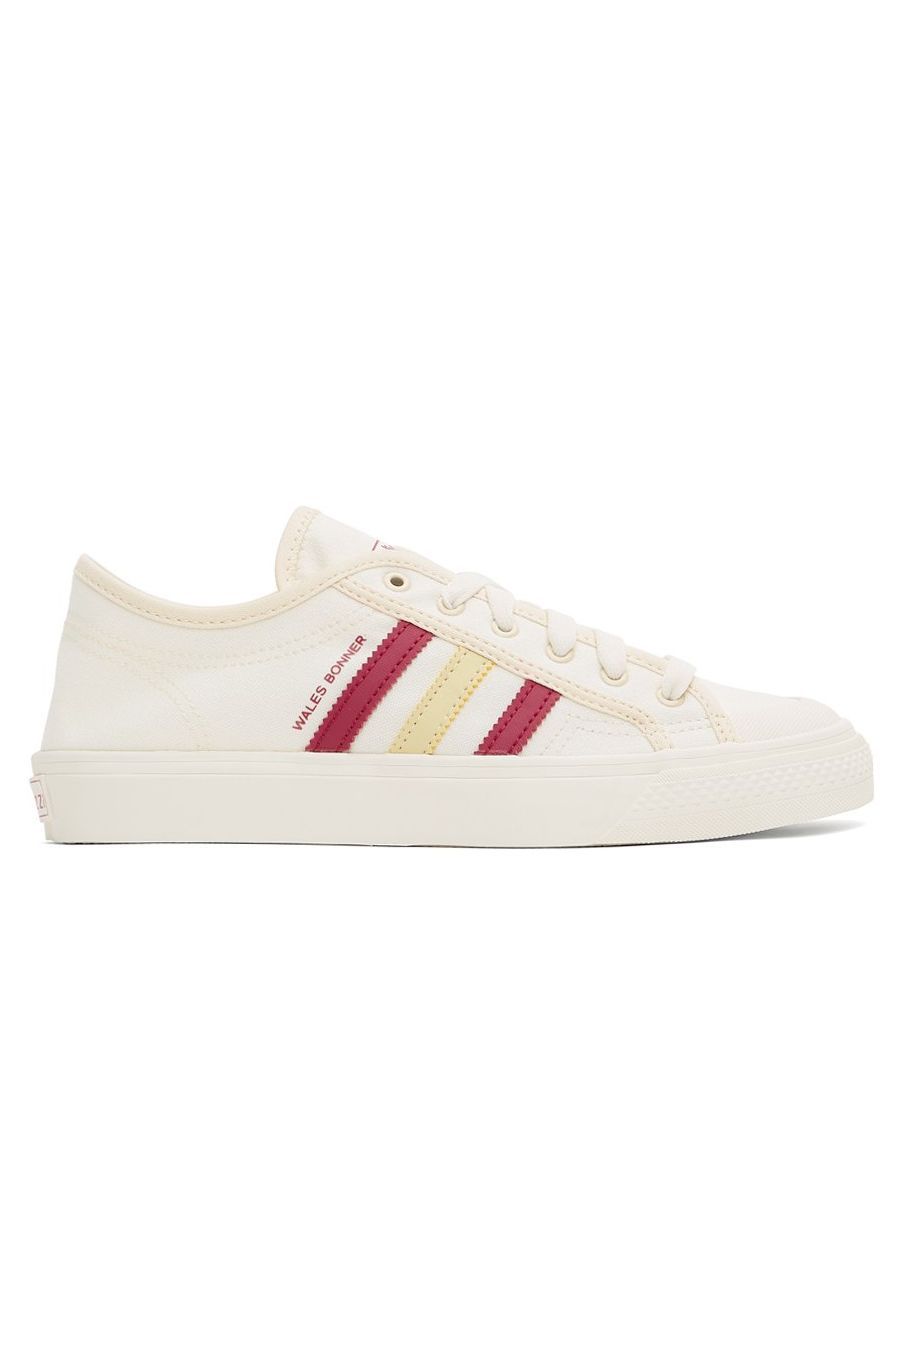 off white sneakers adidas